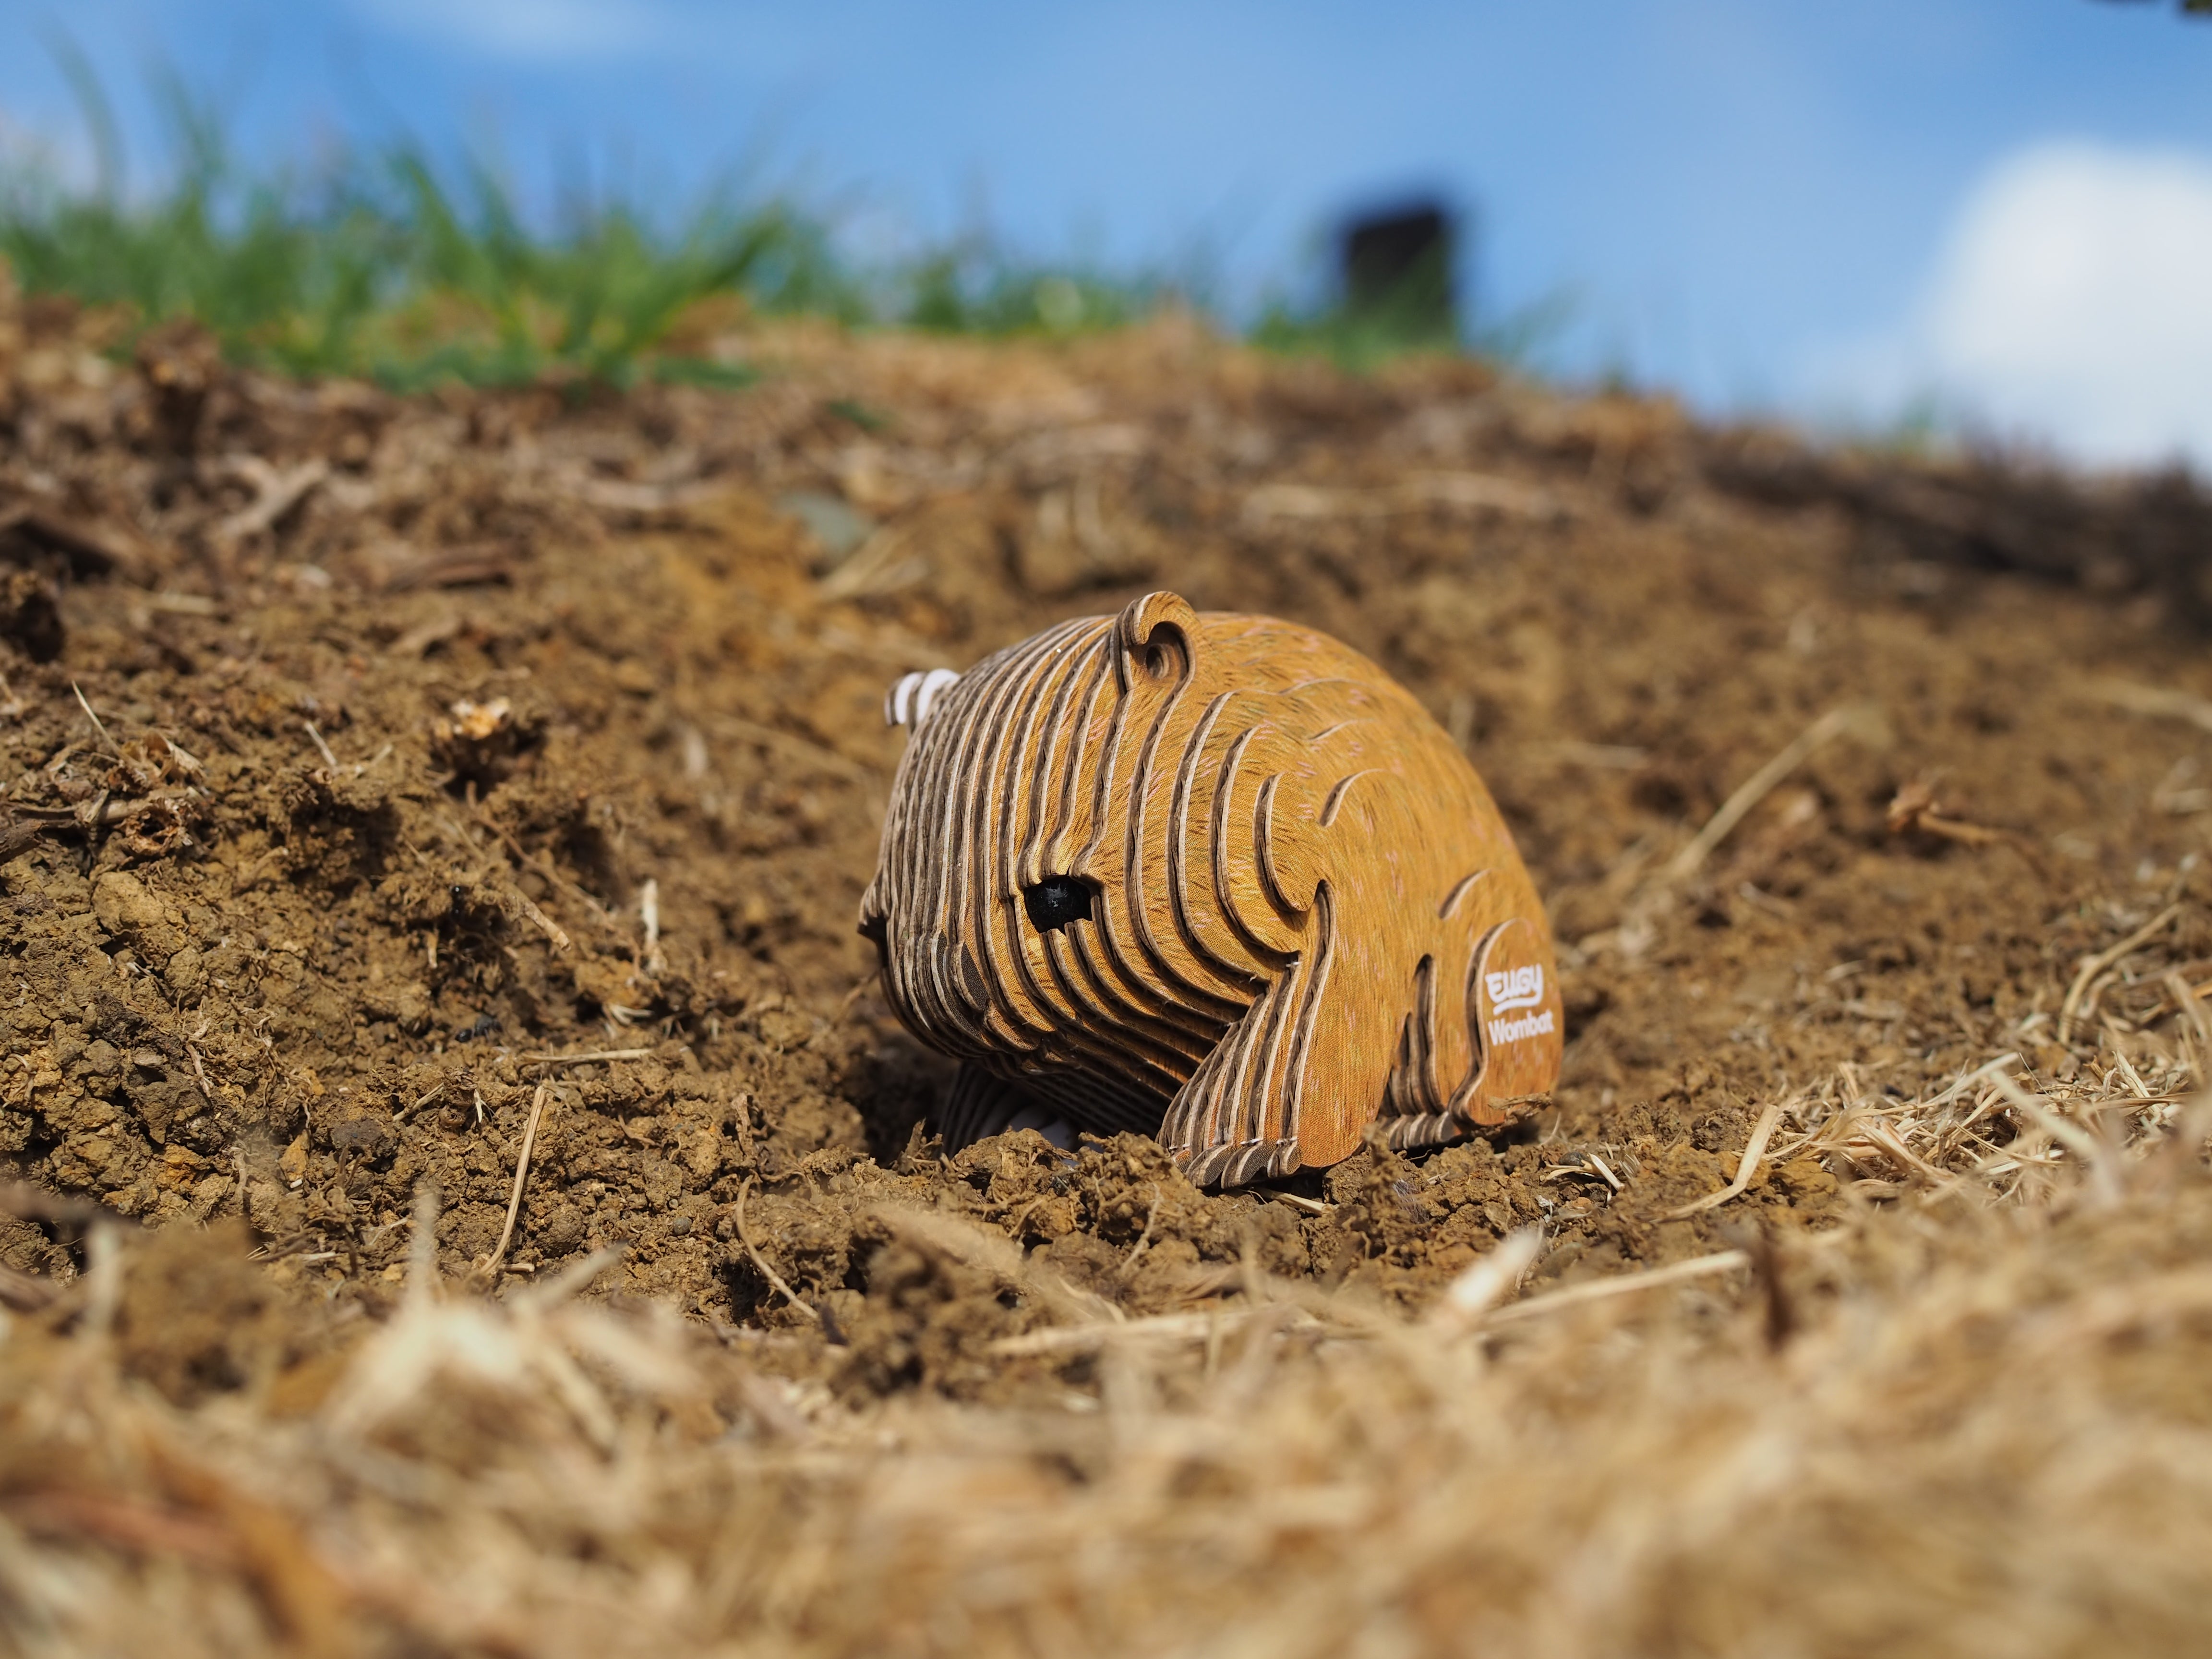 Image of an EUGY Wombat, facing left and viewed front on, standing on a patch of soil with grass in the background